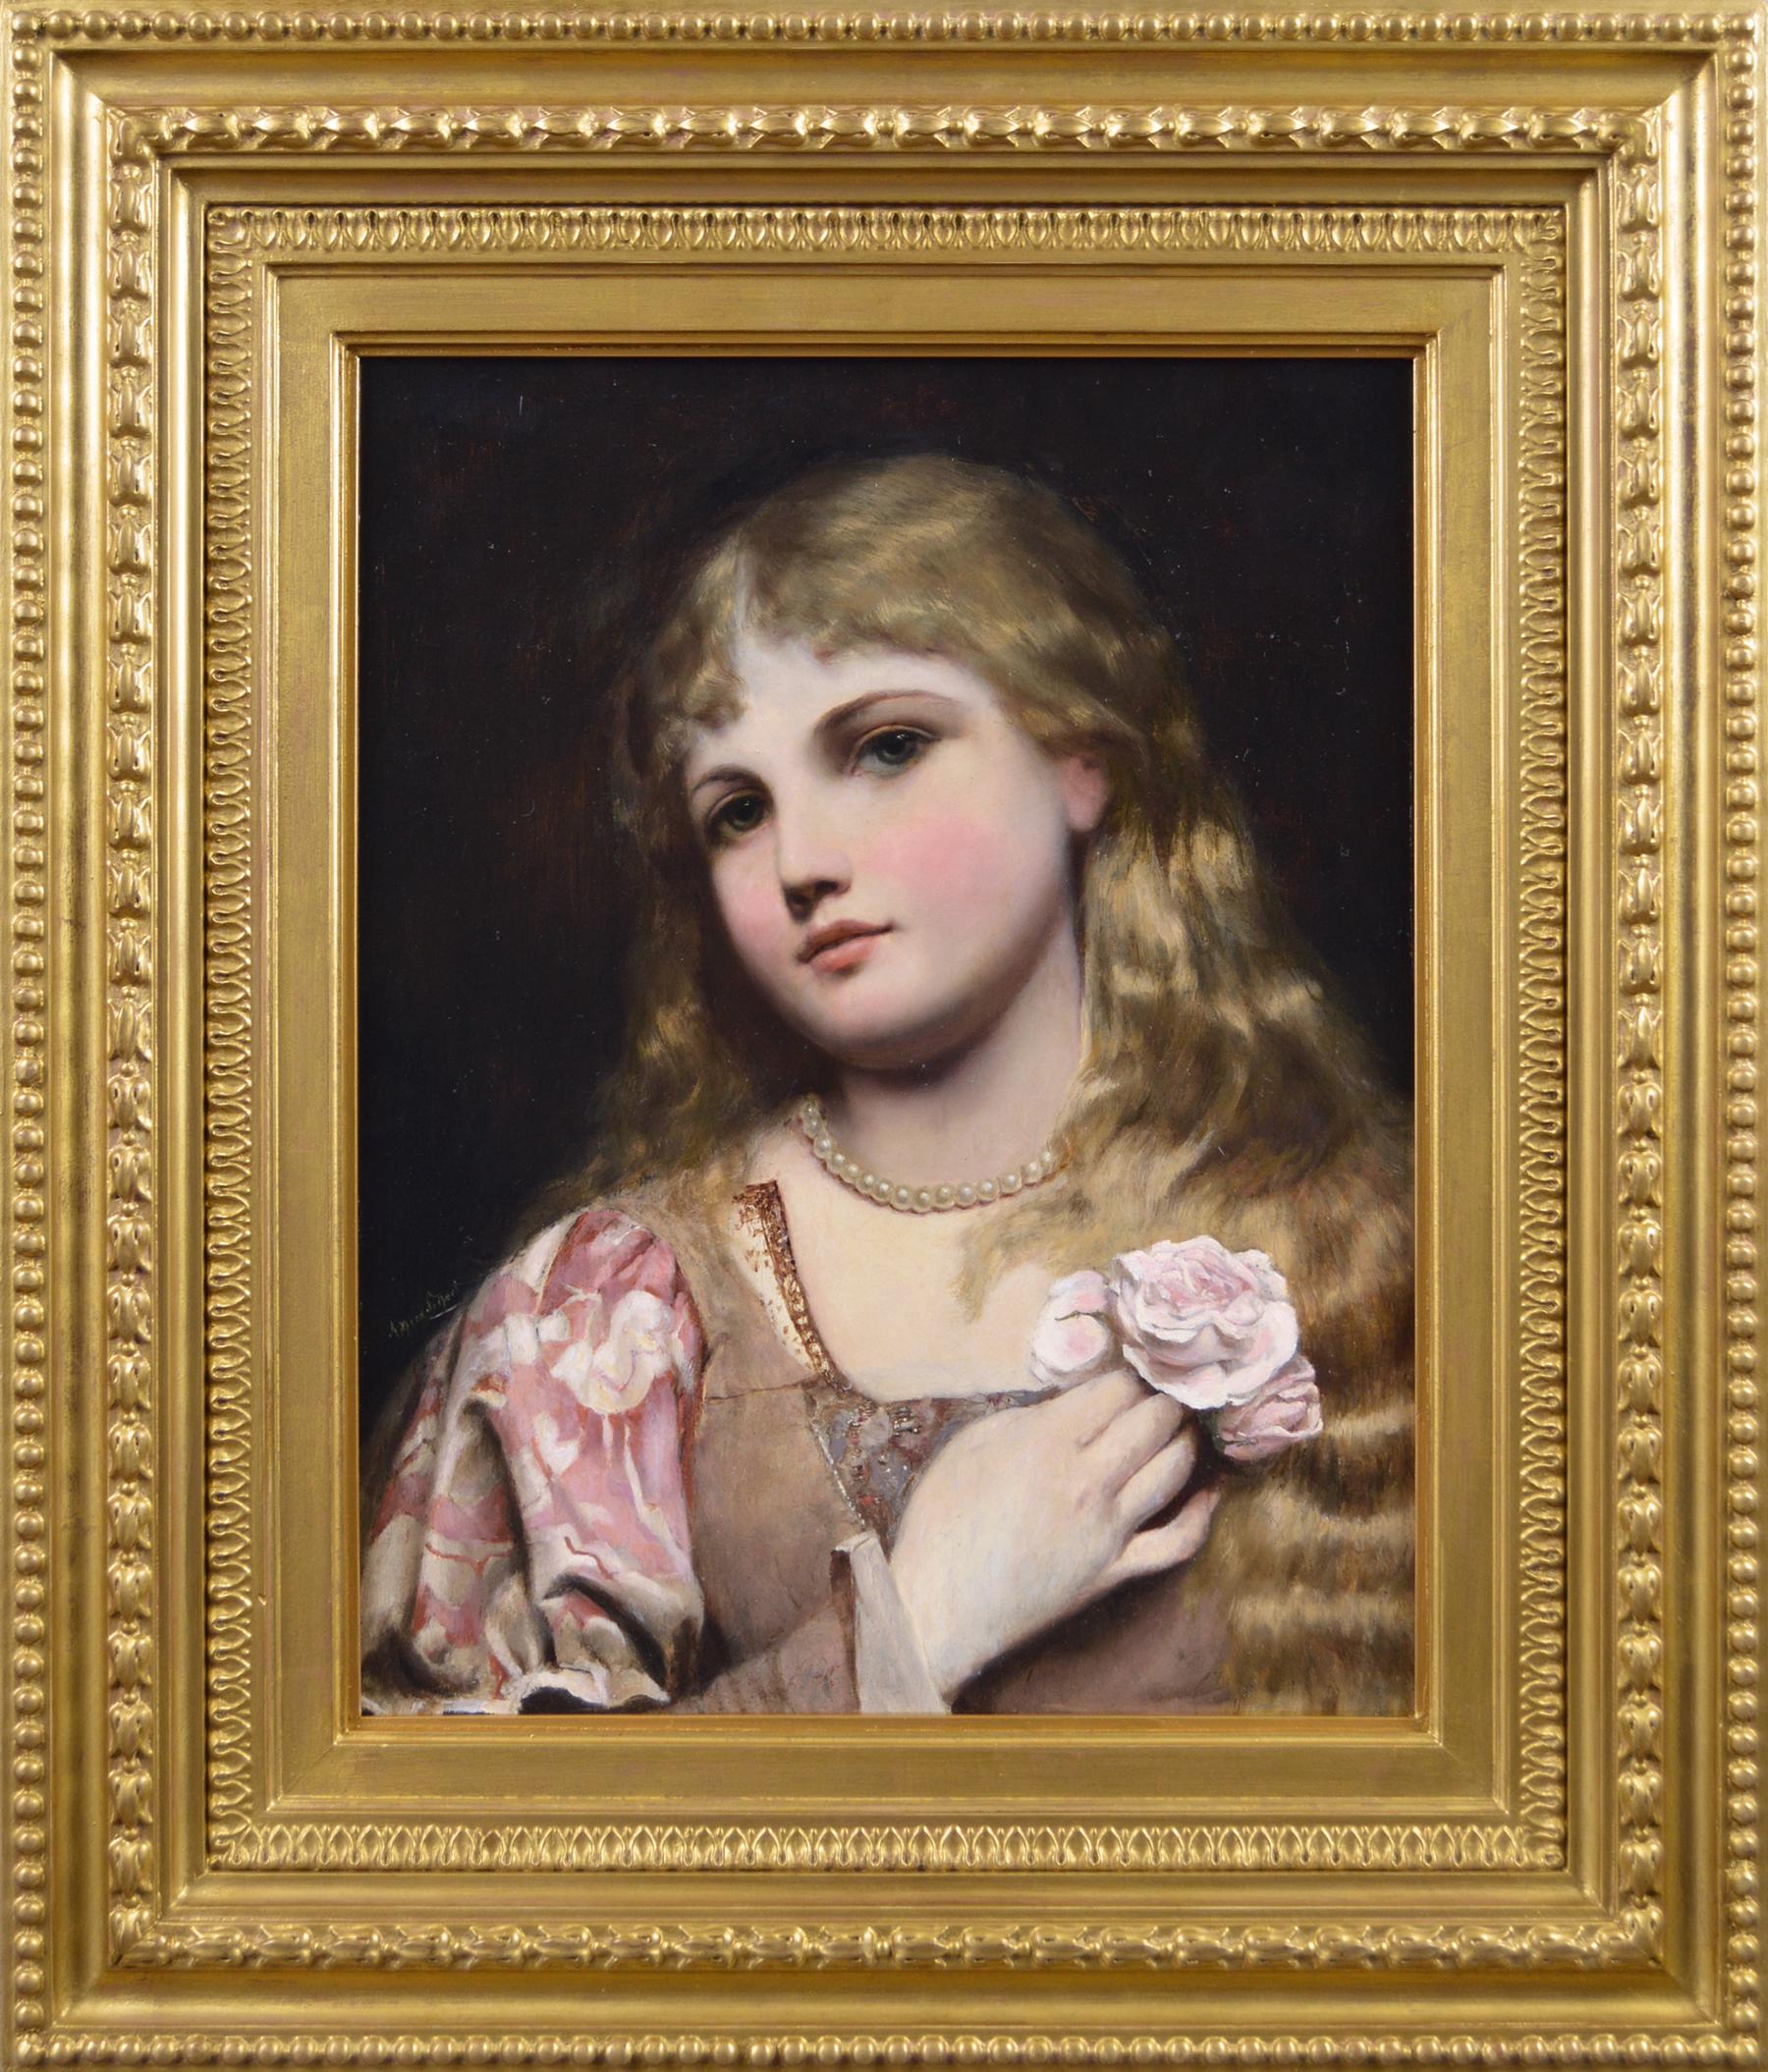 19th Century portrait oil painting of a young woman with pearls & a rose